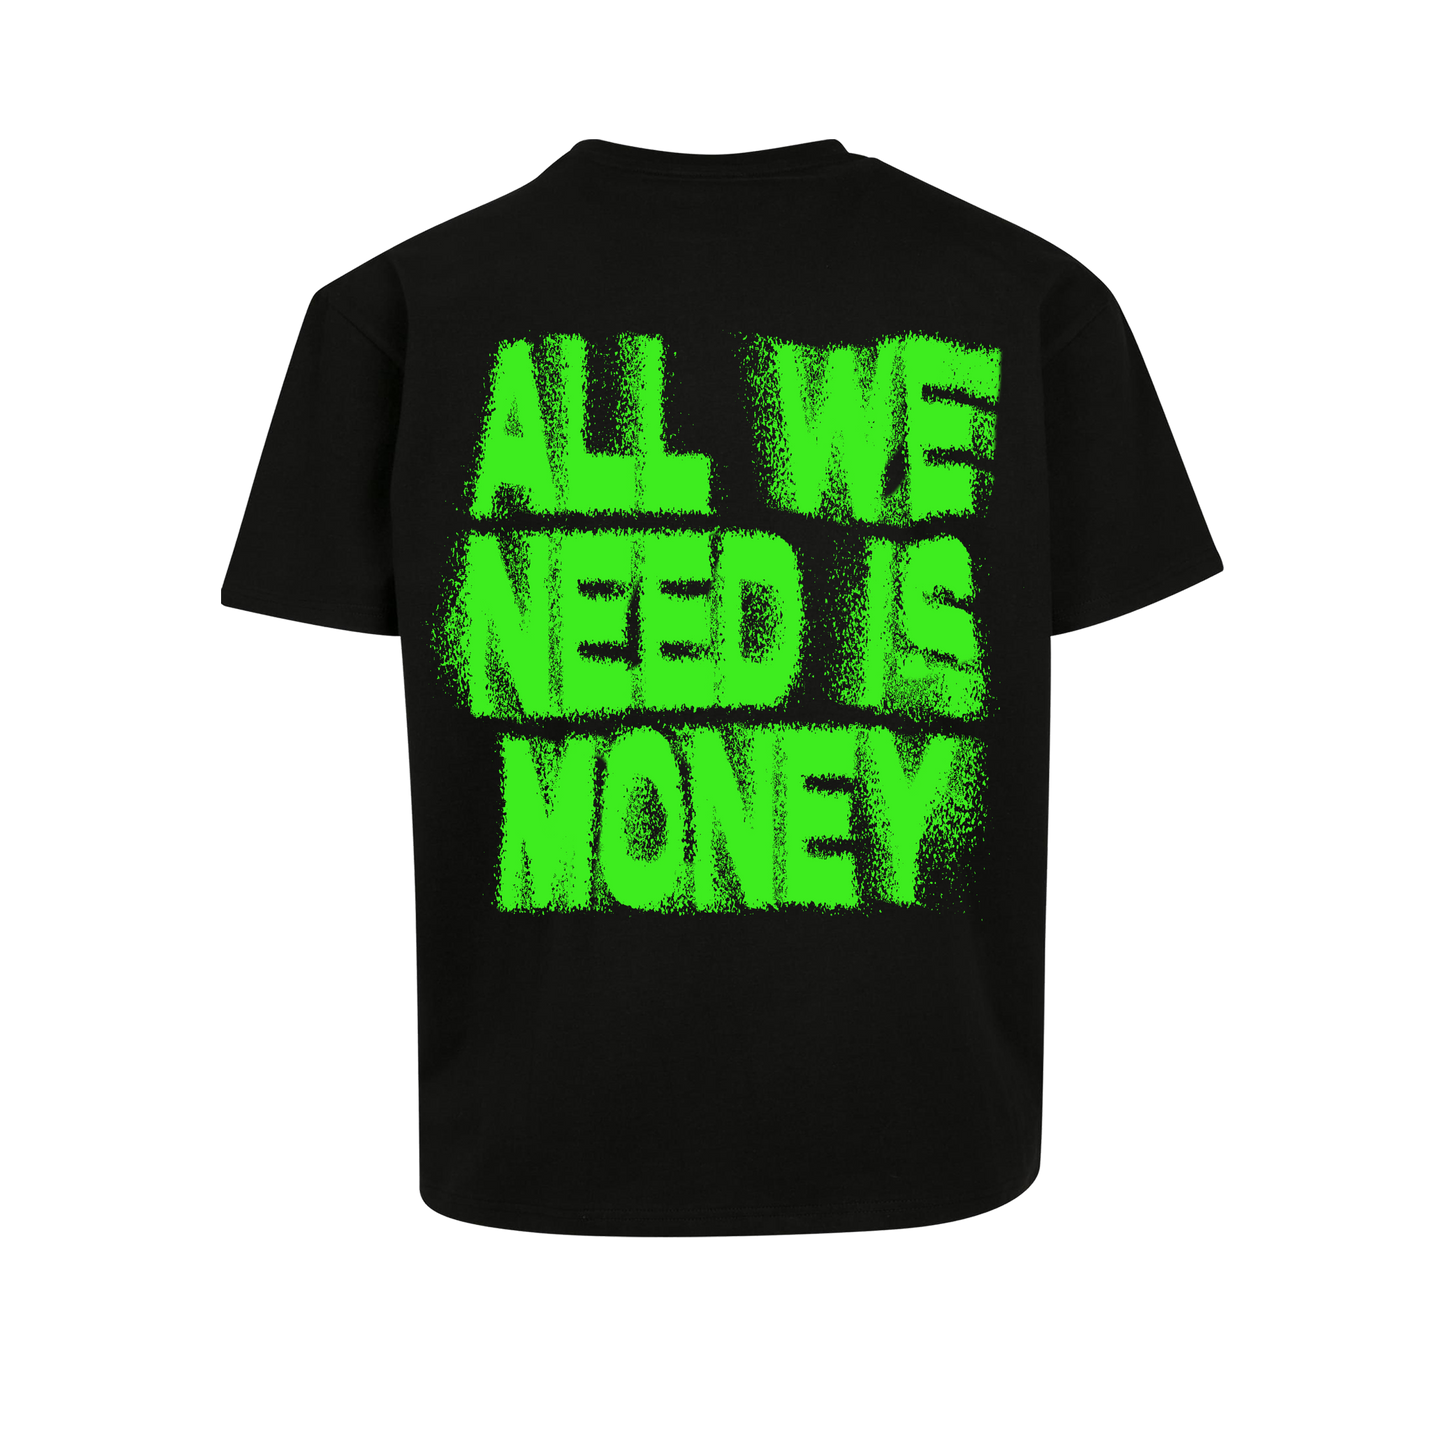 T-SHIRT "ALL WE NEED IS MONEY" BLACK